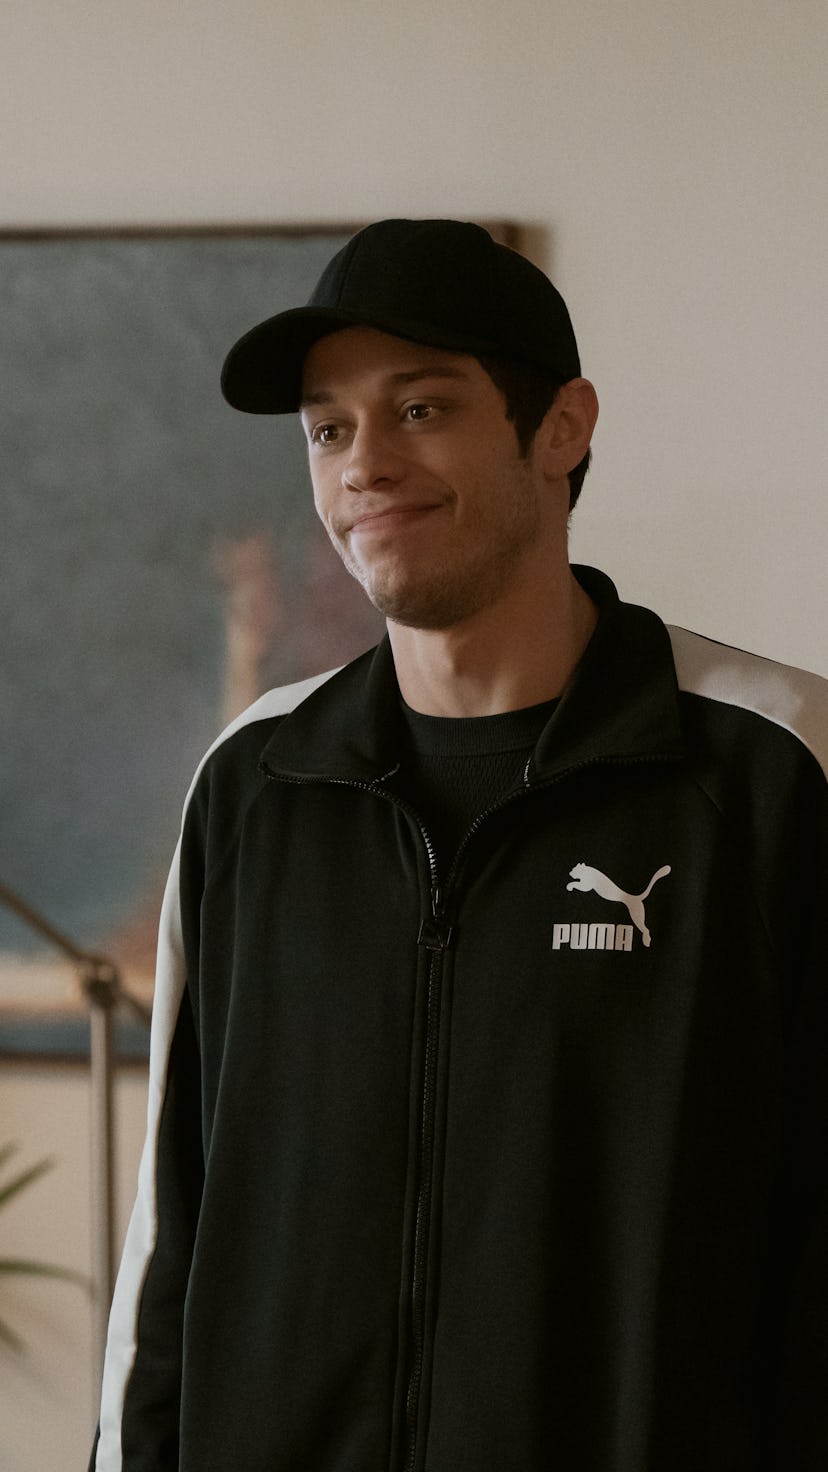 21 Celebrity Cameos In Pete Davidson's 'Bupkis' TV Show On Peacock, Including His Girlfriend Chase S...